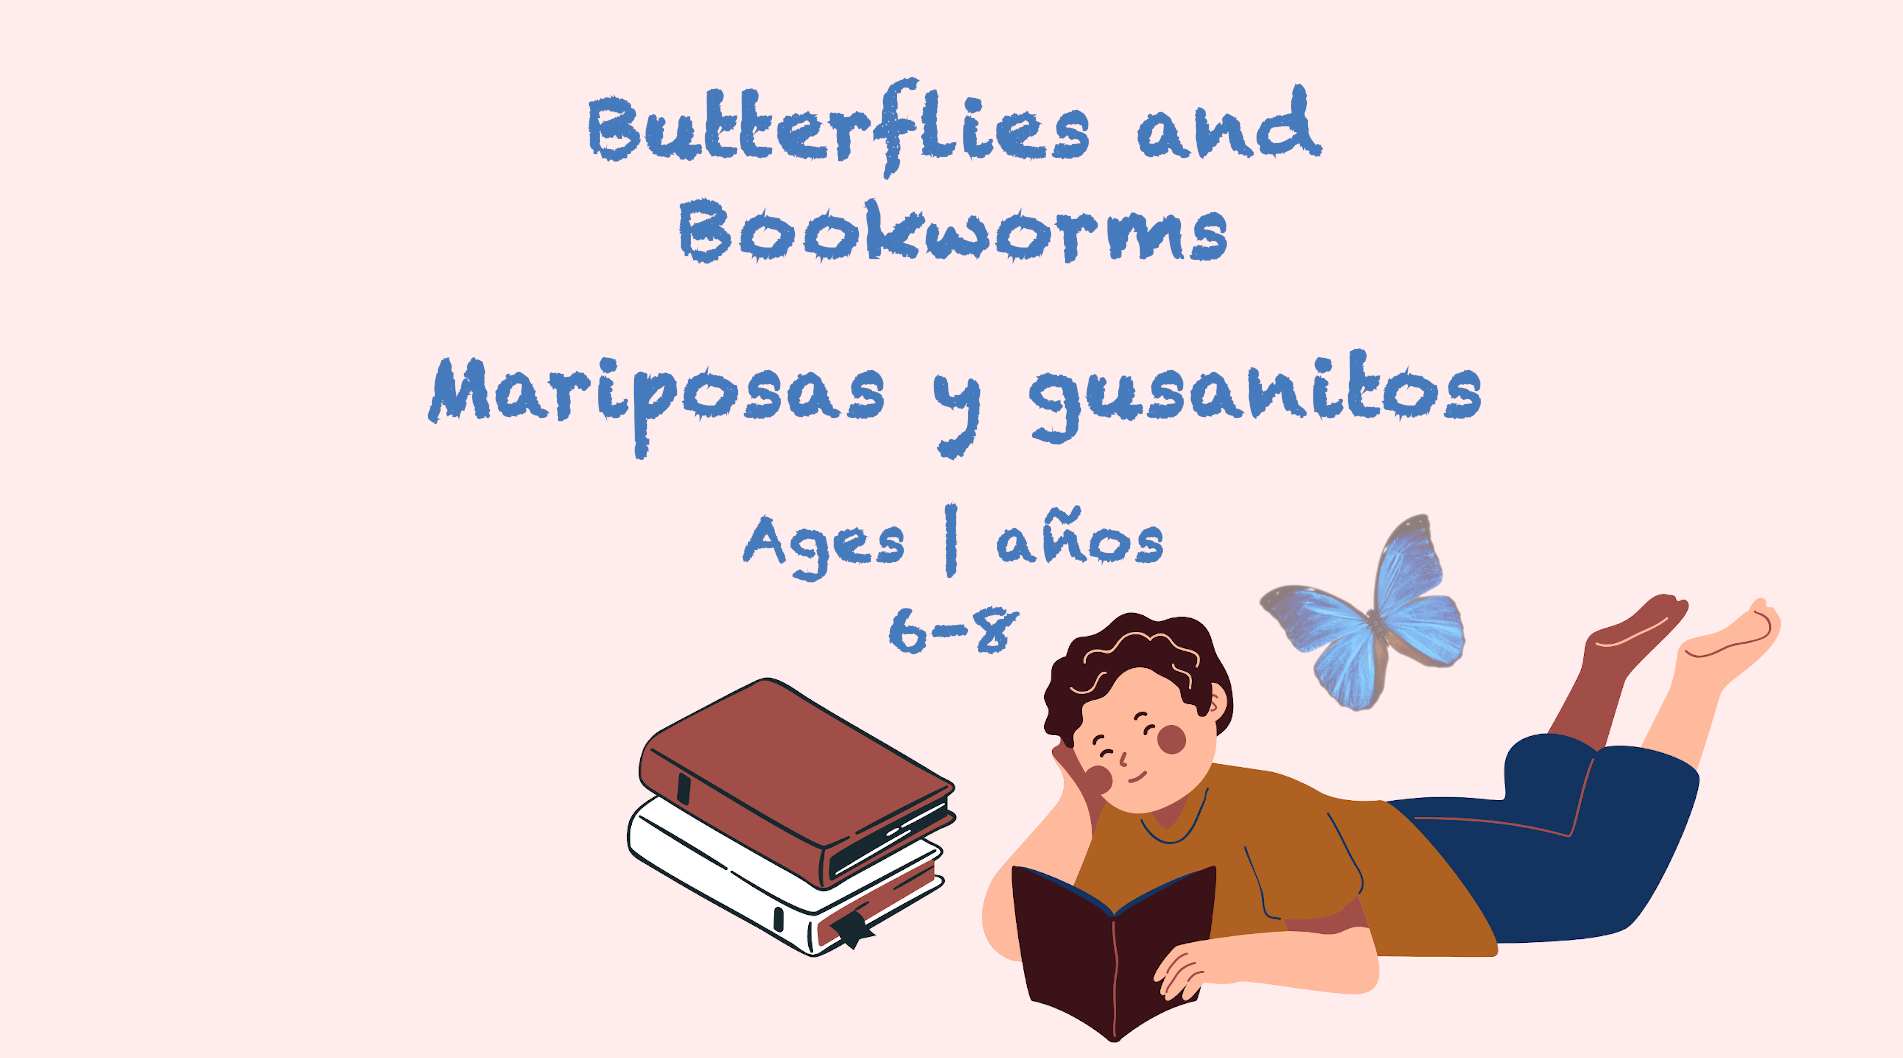 Butterflies and Bookworms for 6-8 year olds